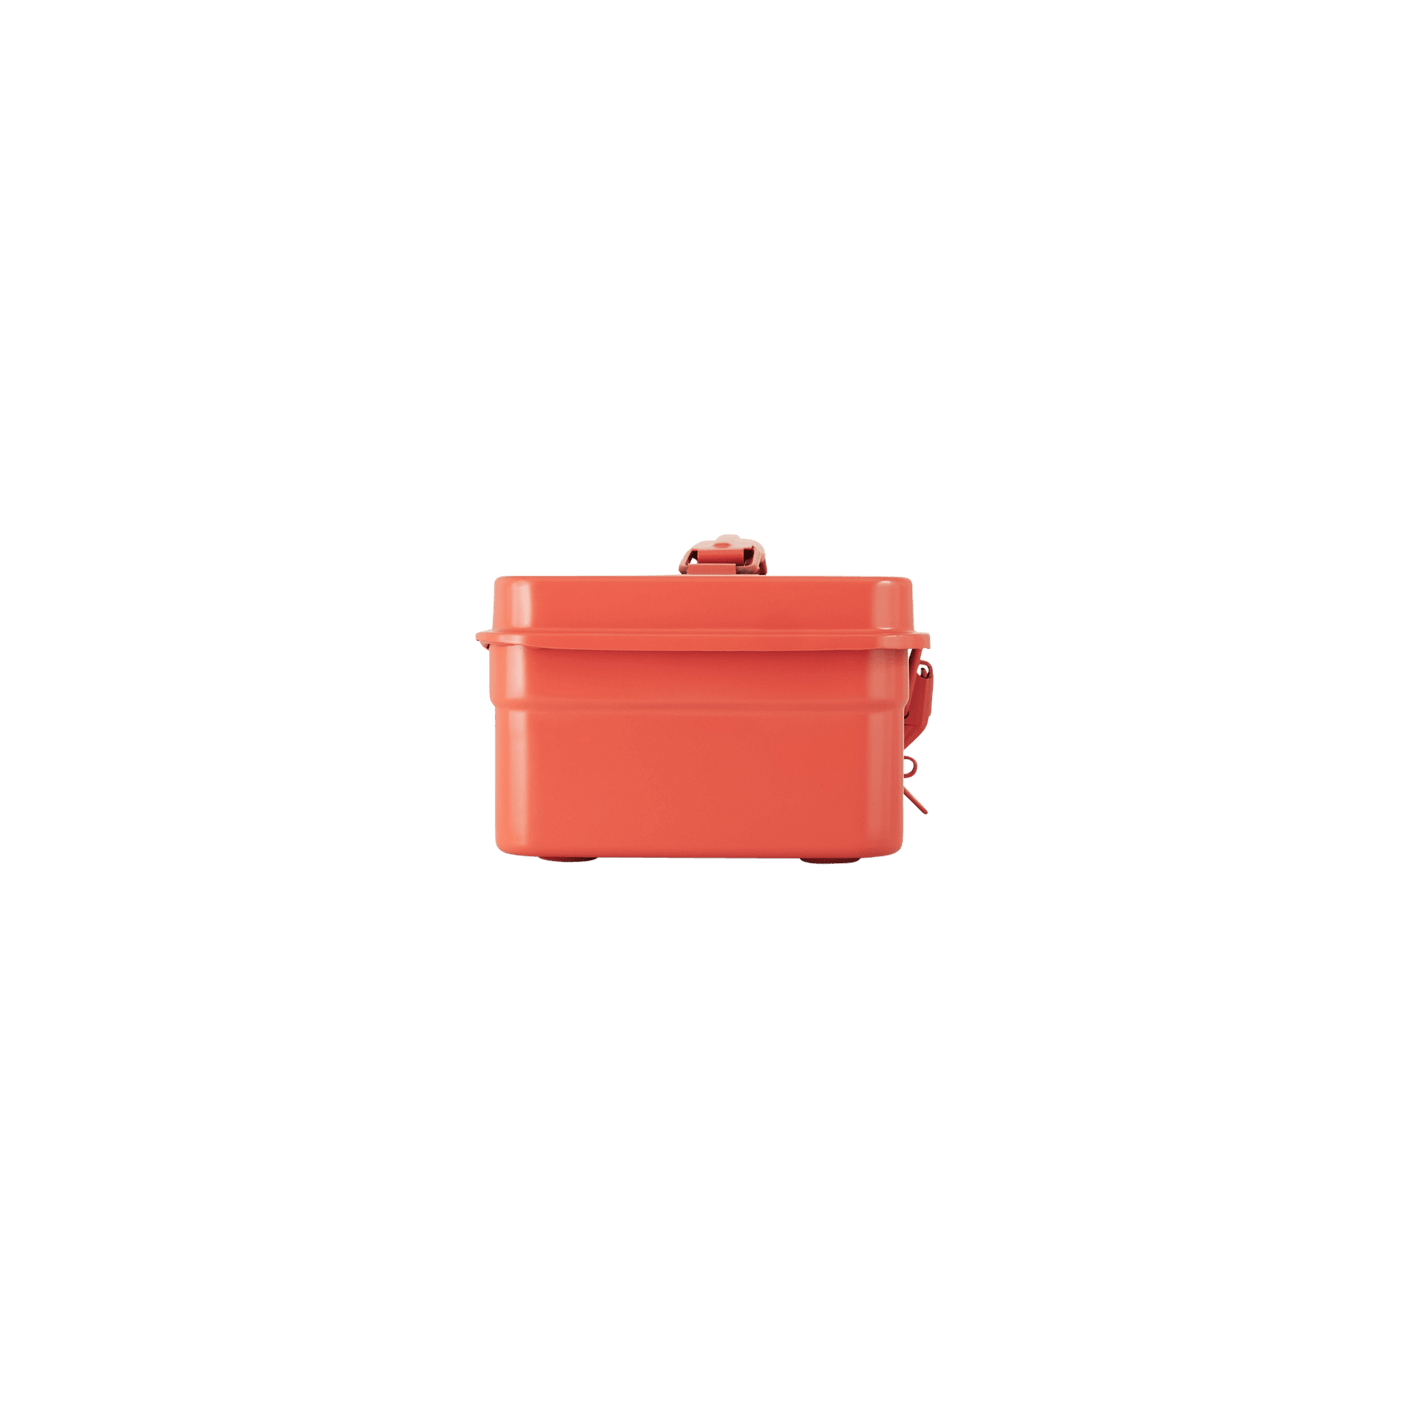 TOYO Trunk Shape Toolbox T-320 P0 (Living coral) - Tool Bags Boxes and Rolls - Japanese Tools Australia